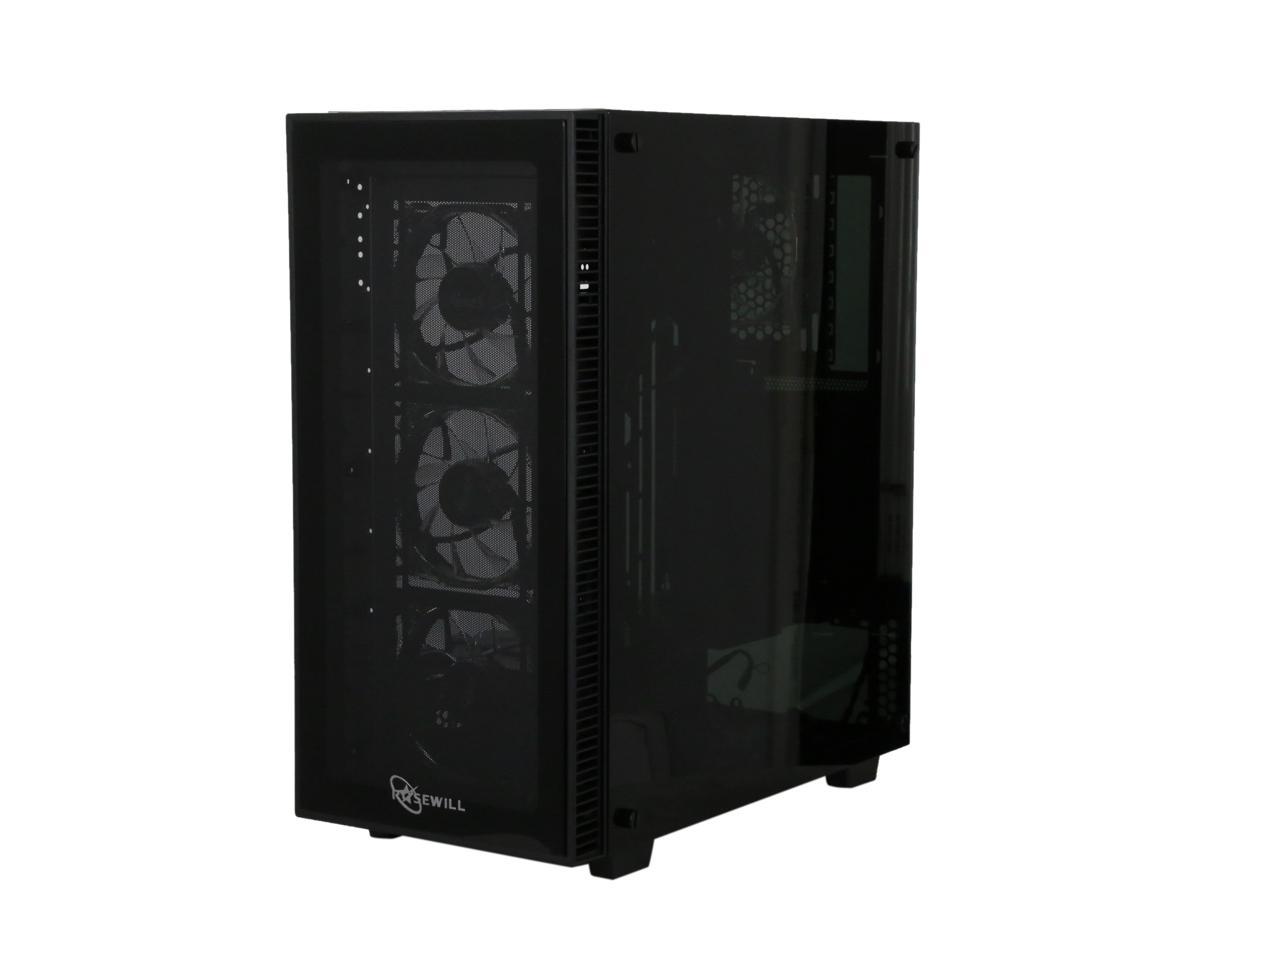 Rosewill Atx Mid Tower Gaming Pc Computer Case With Blue Led Fans - Cullinan Mx-Blue